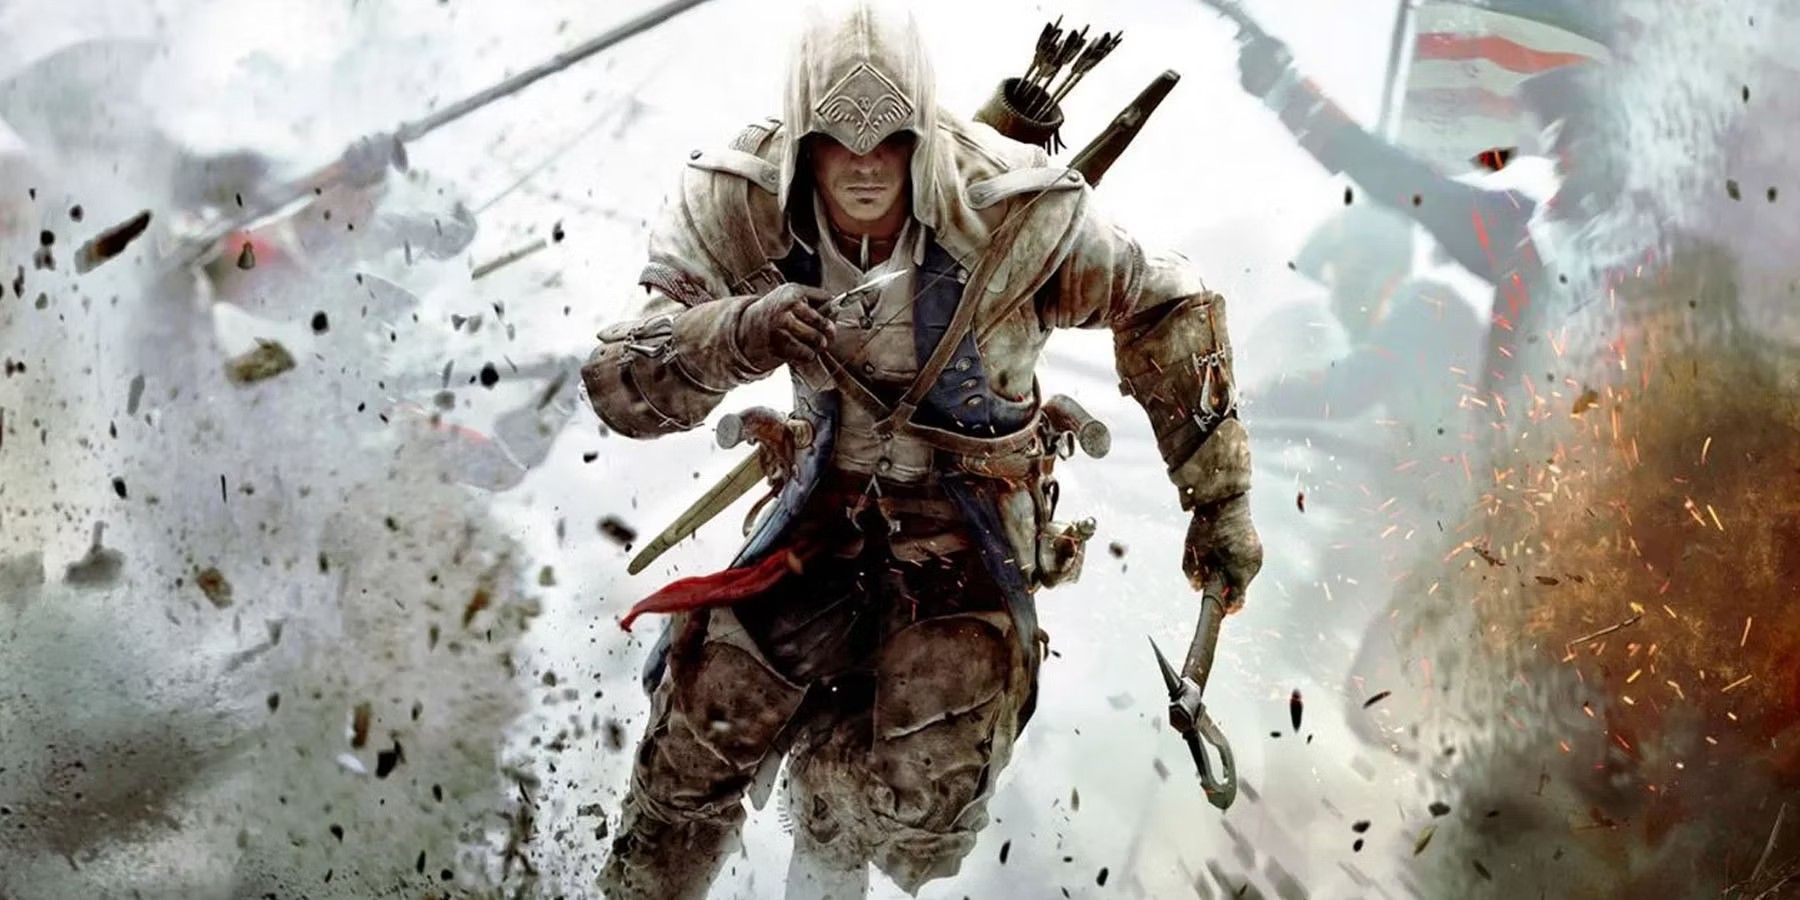 Assassin's Creed's Connor Kenway runs through explosions on the battlefield with his signature tomahawk and Hidden Blade.